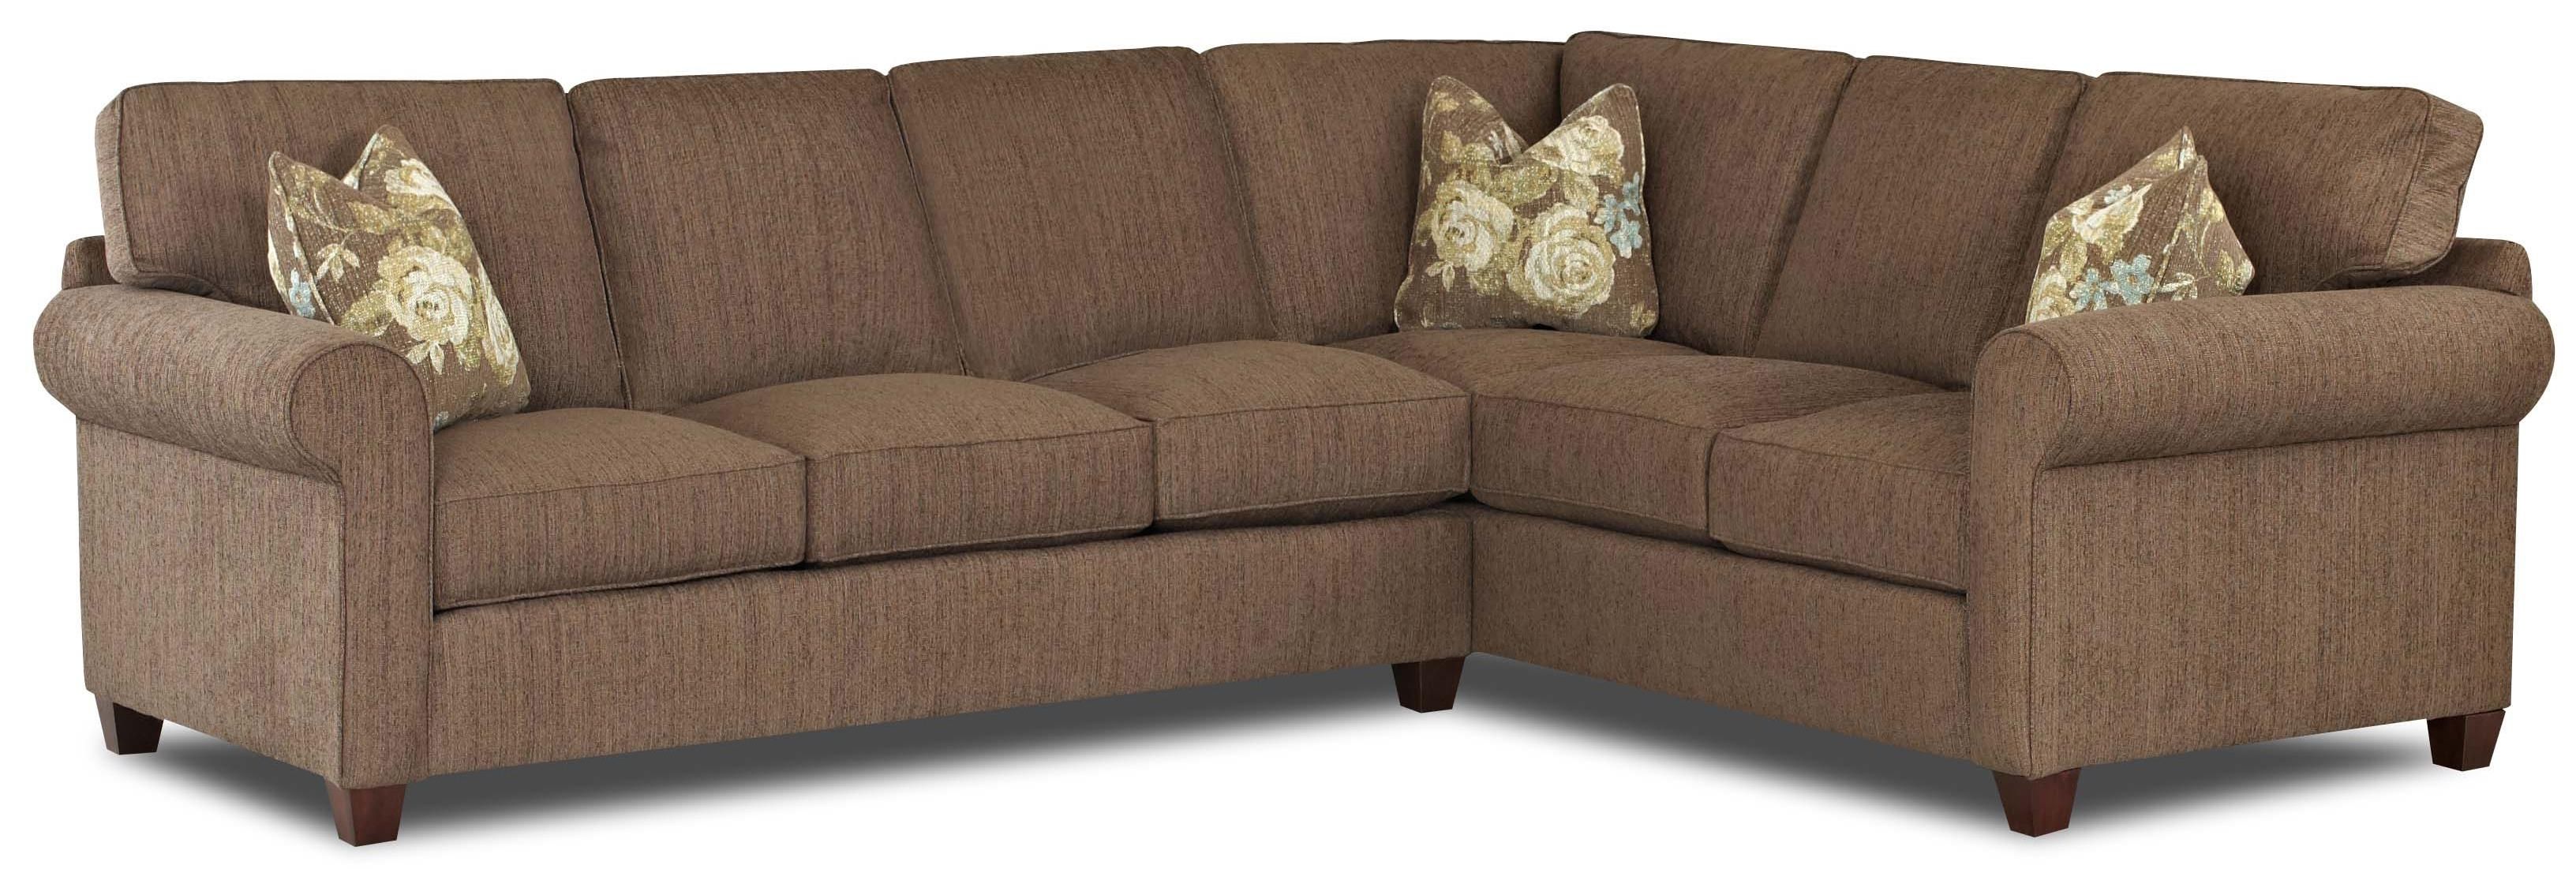 Most Recently Released Lancaster Pa Sectional Sofas In Transitional 2 Piece Sectional Sofa With Weltklaussner (View 1 of 15)